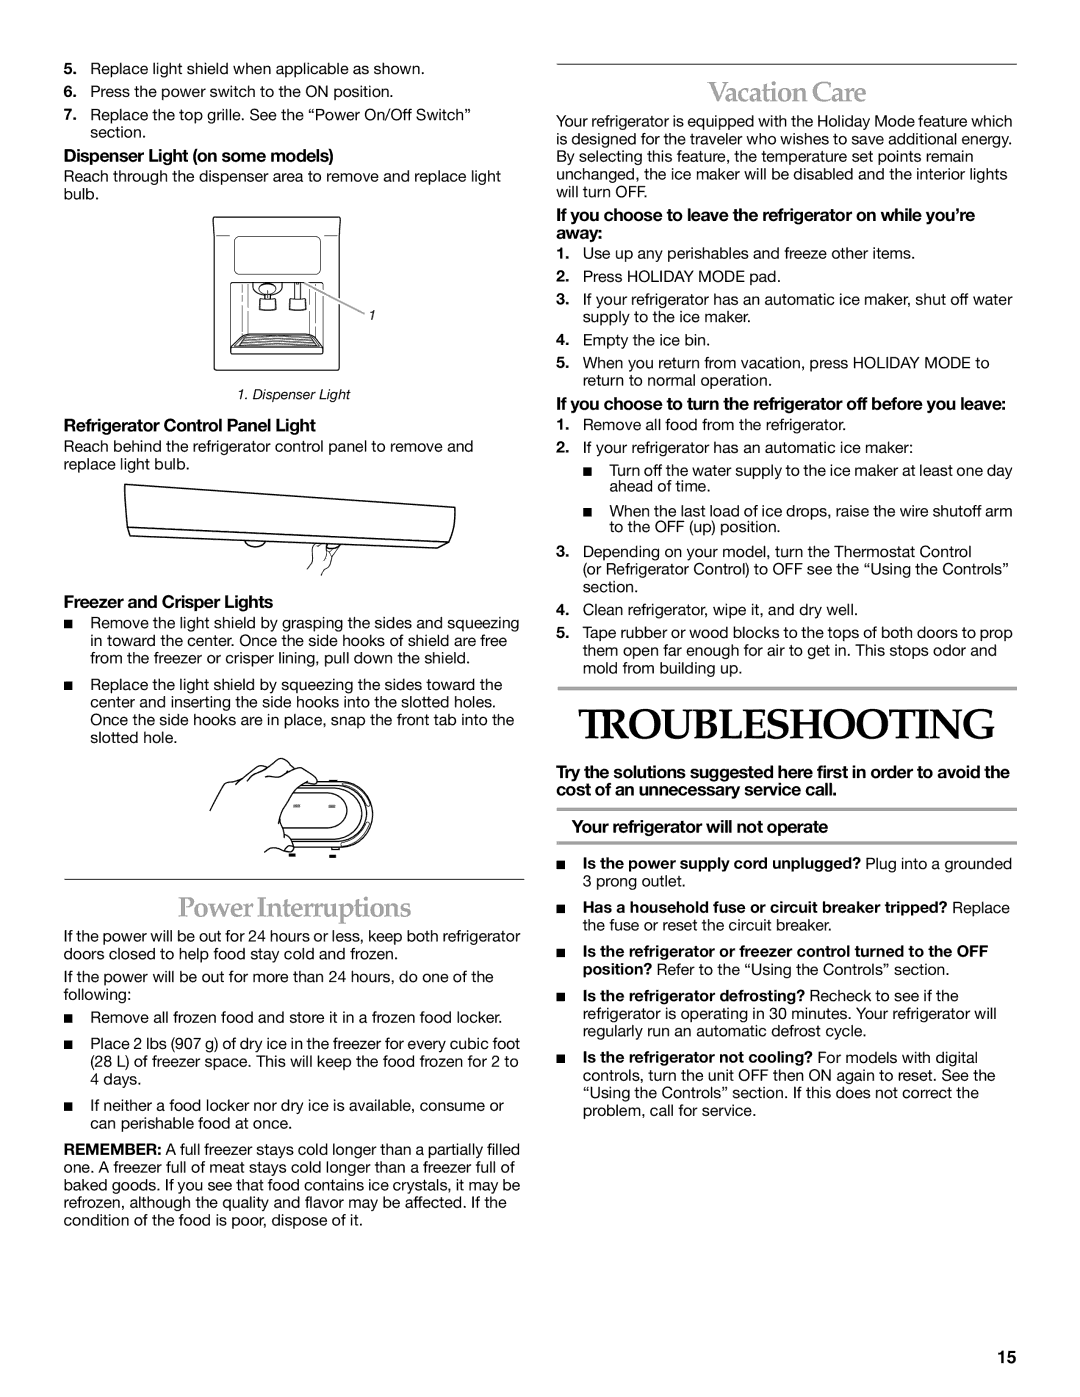 KitchenAid Side-by-Side Referigerator manual Troubleshooting, Power Interruptions, Vacation Care 